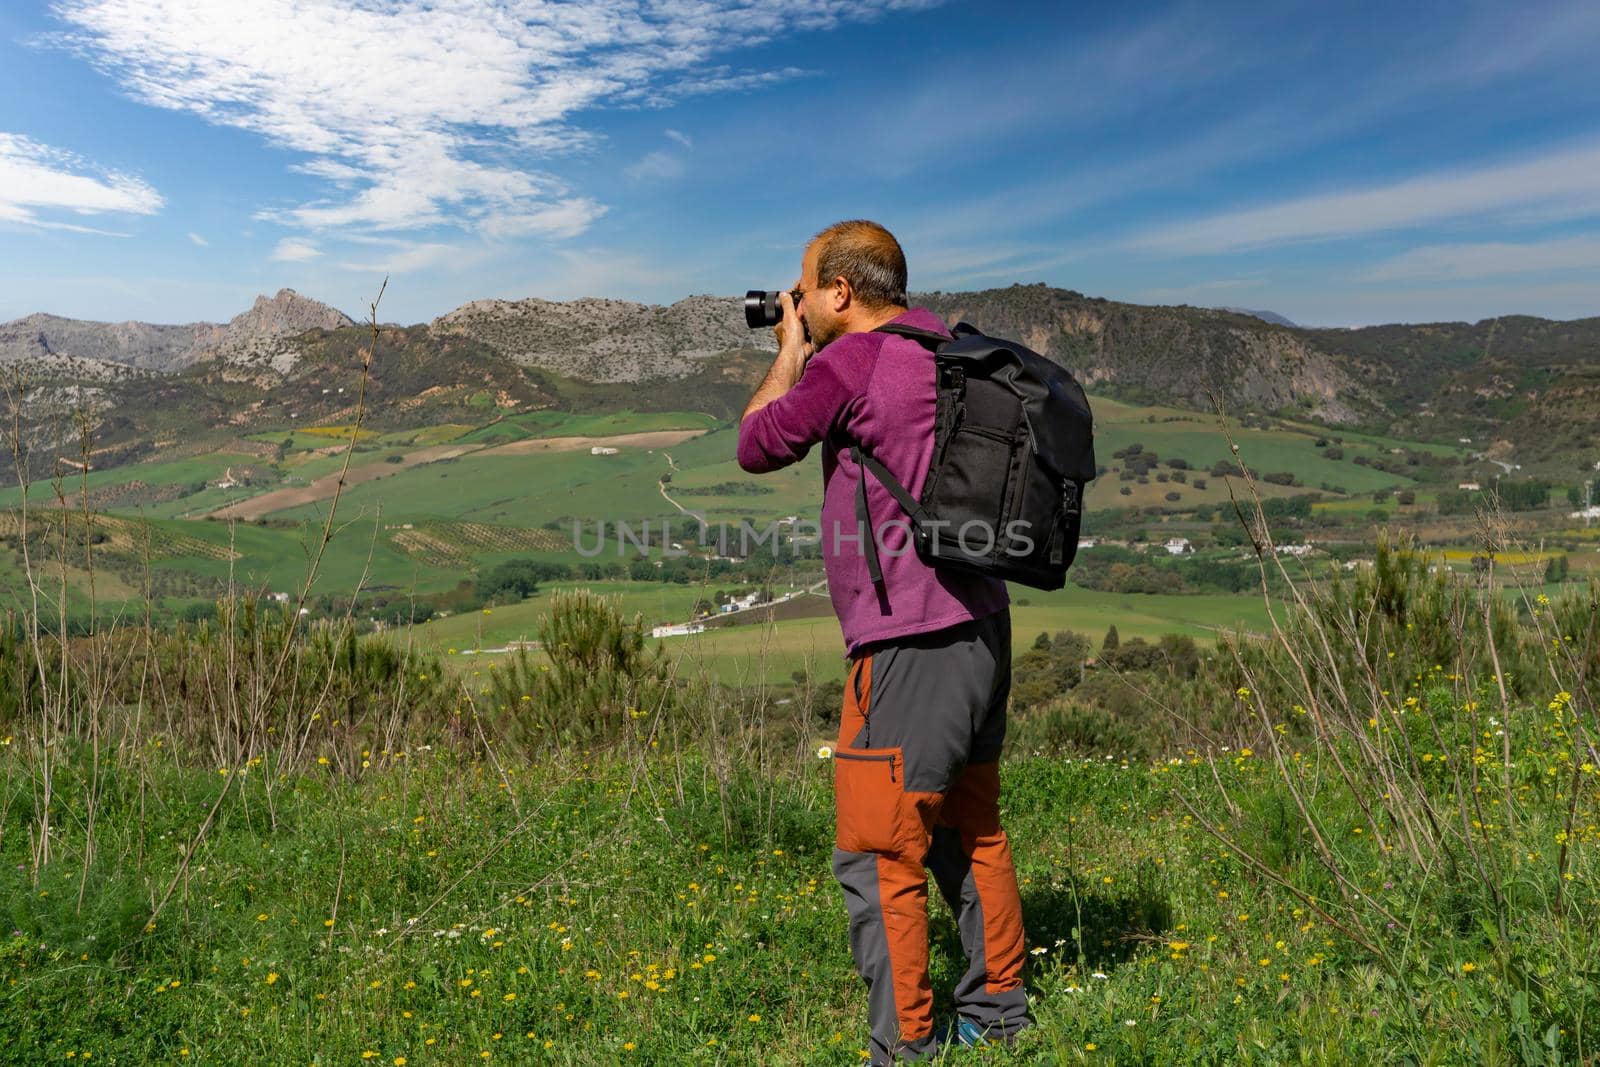 a man with a backpack on the mountain photographing the landscape on a cloudy sky day